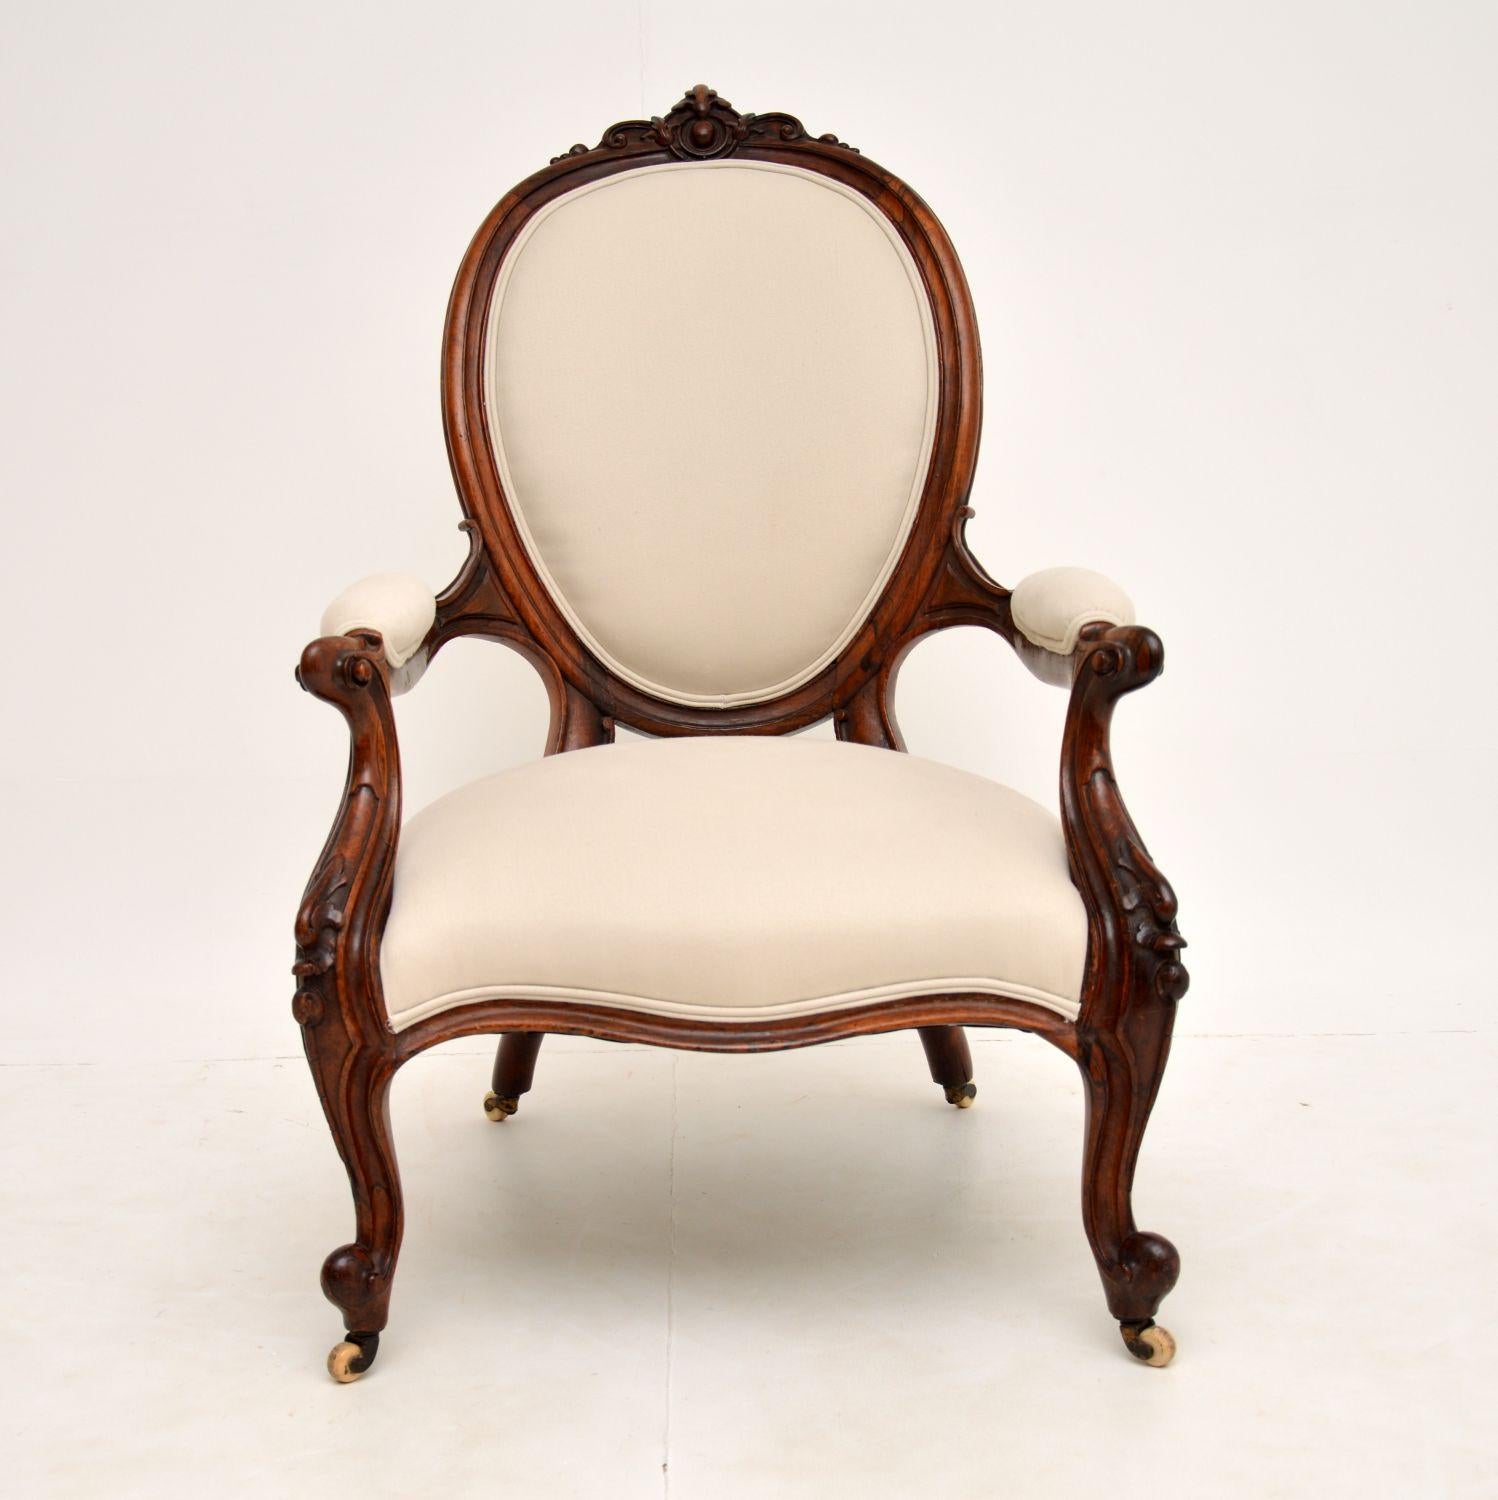 A stunning antique Victorian armchair, beautifully carved. This dates from around the 1840-60’s period & is one of the nicest examples of this kind of armchair we have had.

It is of extremely fine quality, the carving is beautifully executed and